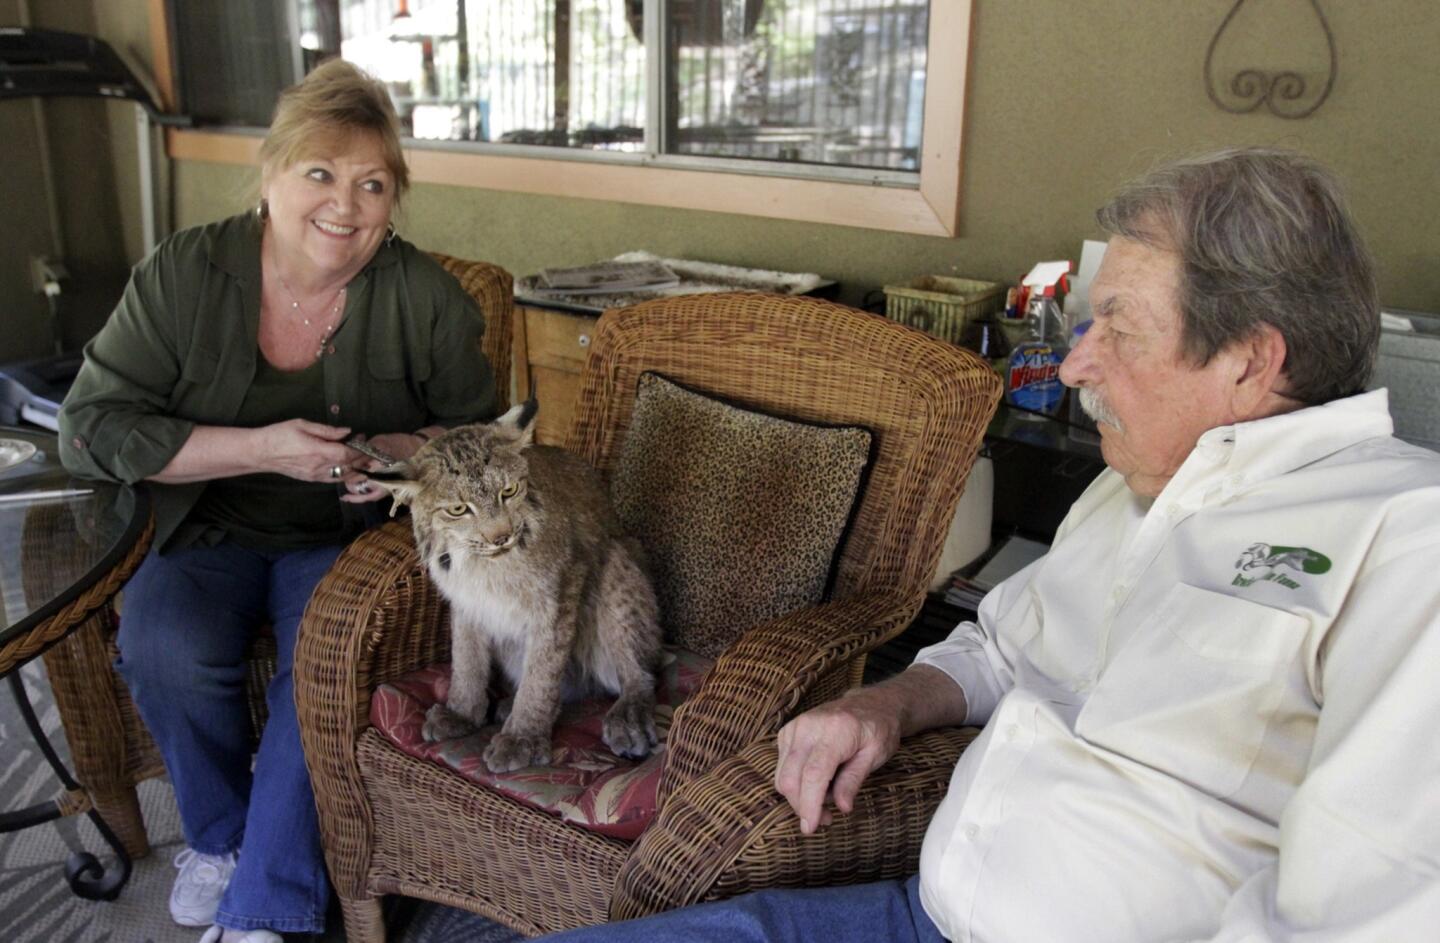 Jim and Gina Brockett are owners of Brocketts Film Fauna, a company in Thousand Oaks that supplies reptiles, bugs and other animals to the film industry. Here, they take a seat with a lynx named Aspen.